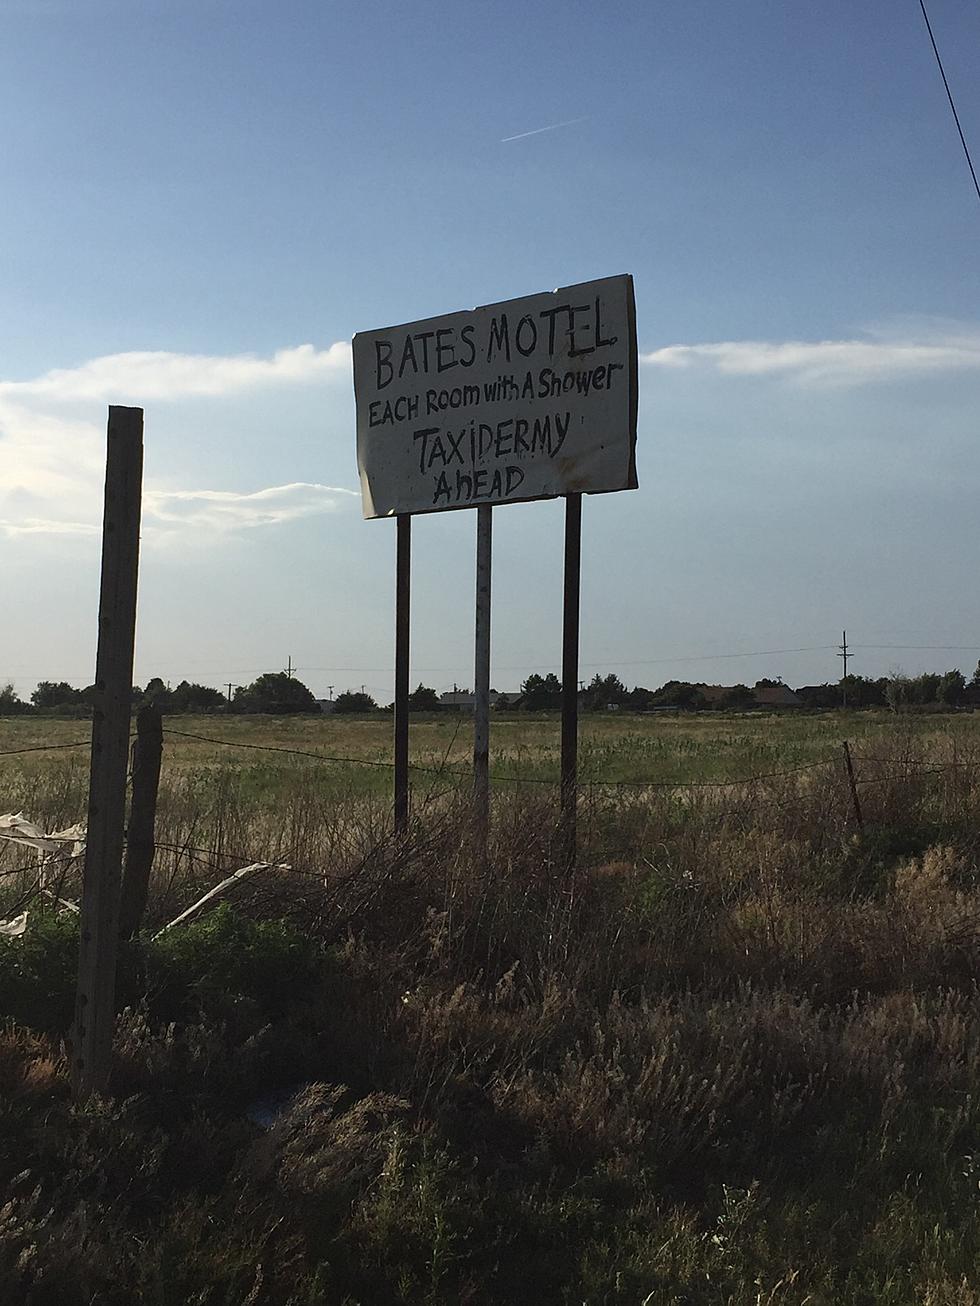 What’s The Strange “Bates Motel” Sign Off I-40 About?